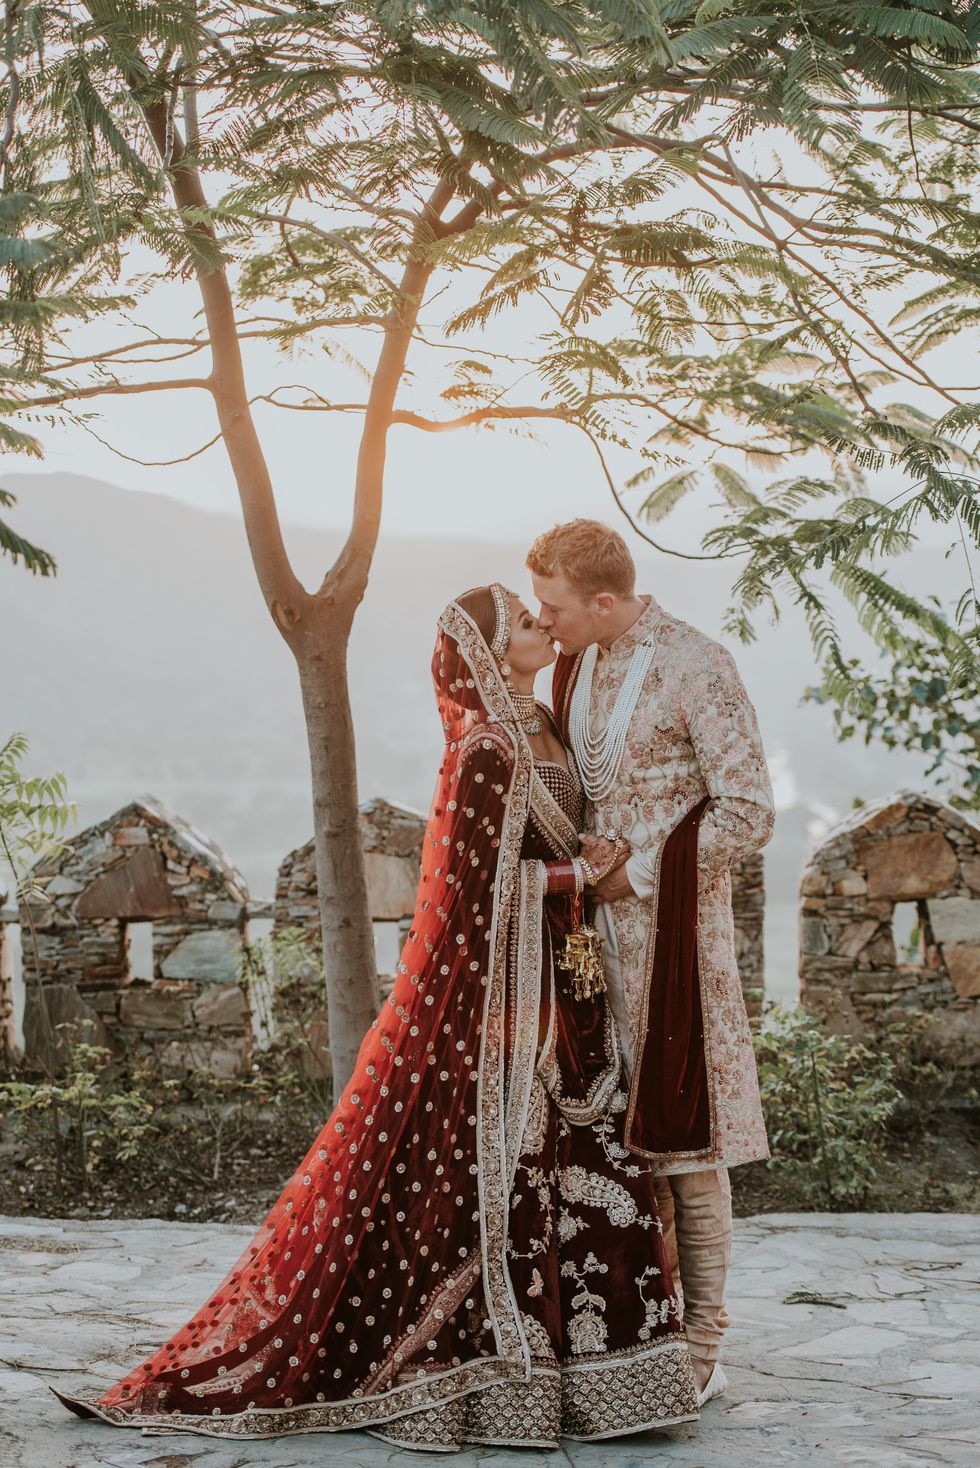 Photograph, Red, Dress, Tree, Outerwear, Photography, Tradition, Bride, Textile, Sari, 